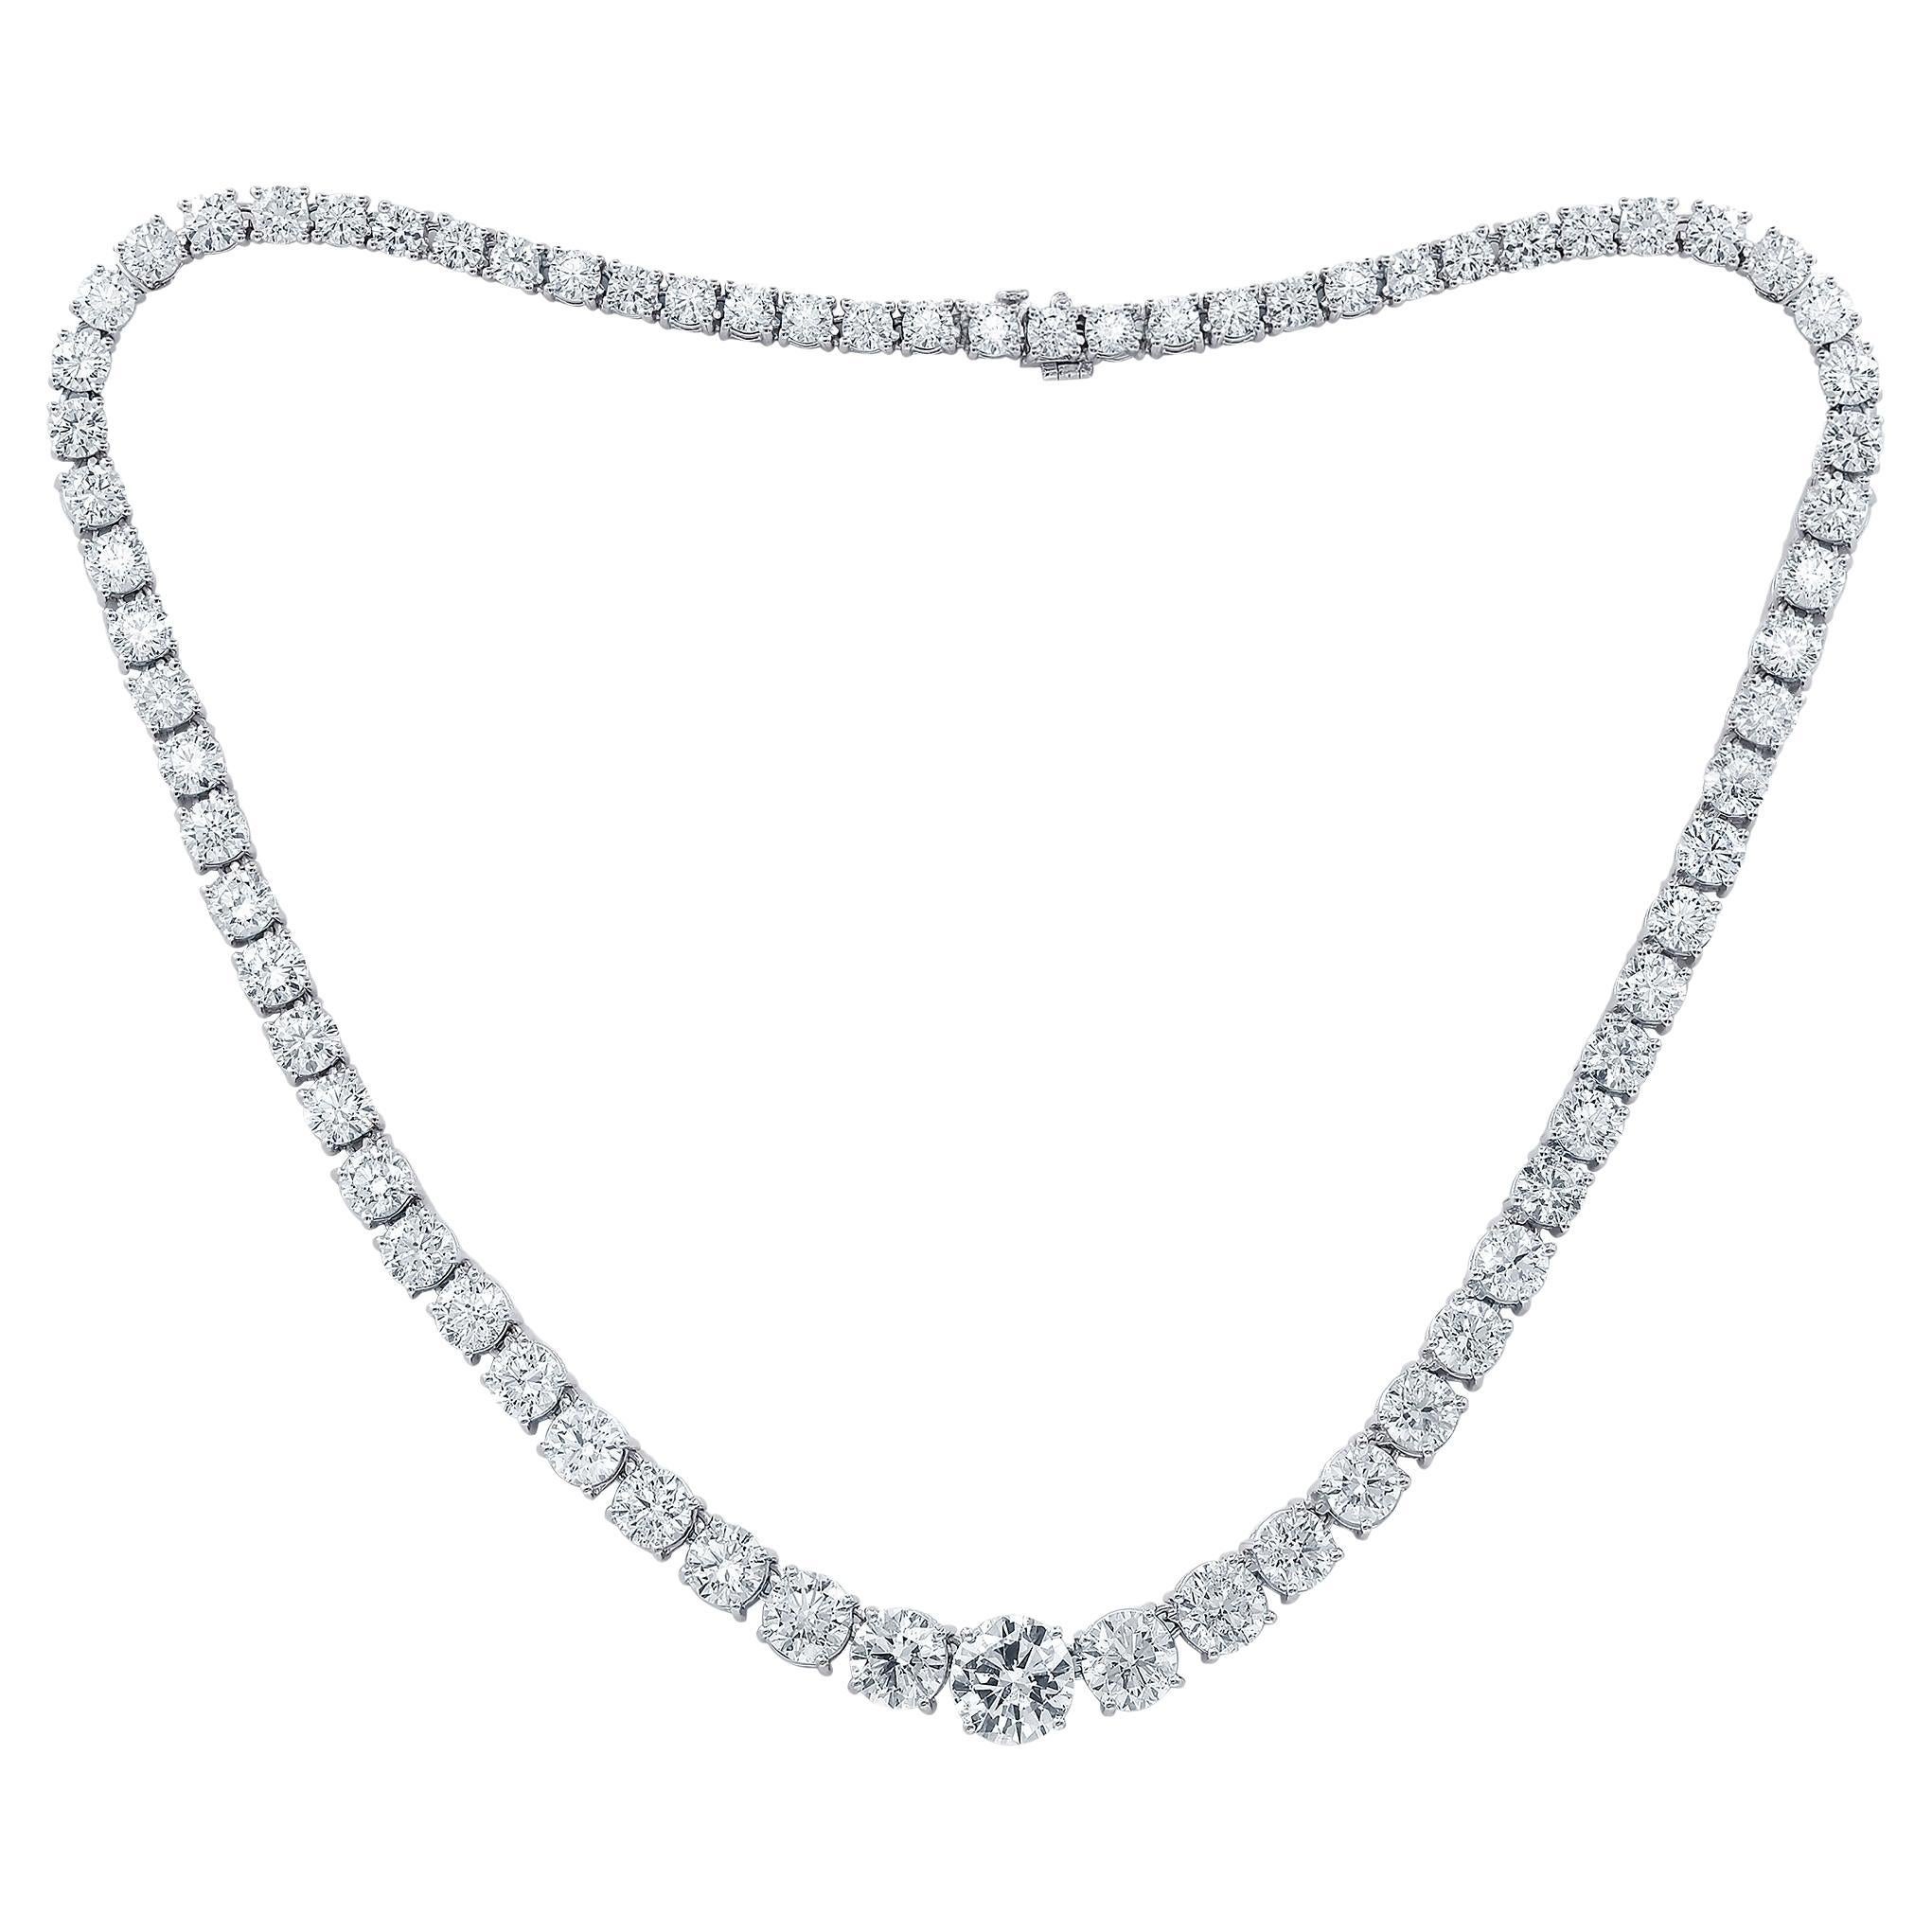 Diana M. Dazzling Riviera Necklace with 45.49cts all GIA flawless diamonds For Sale